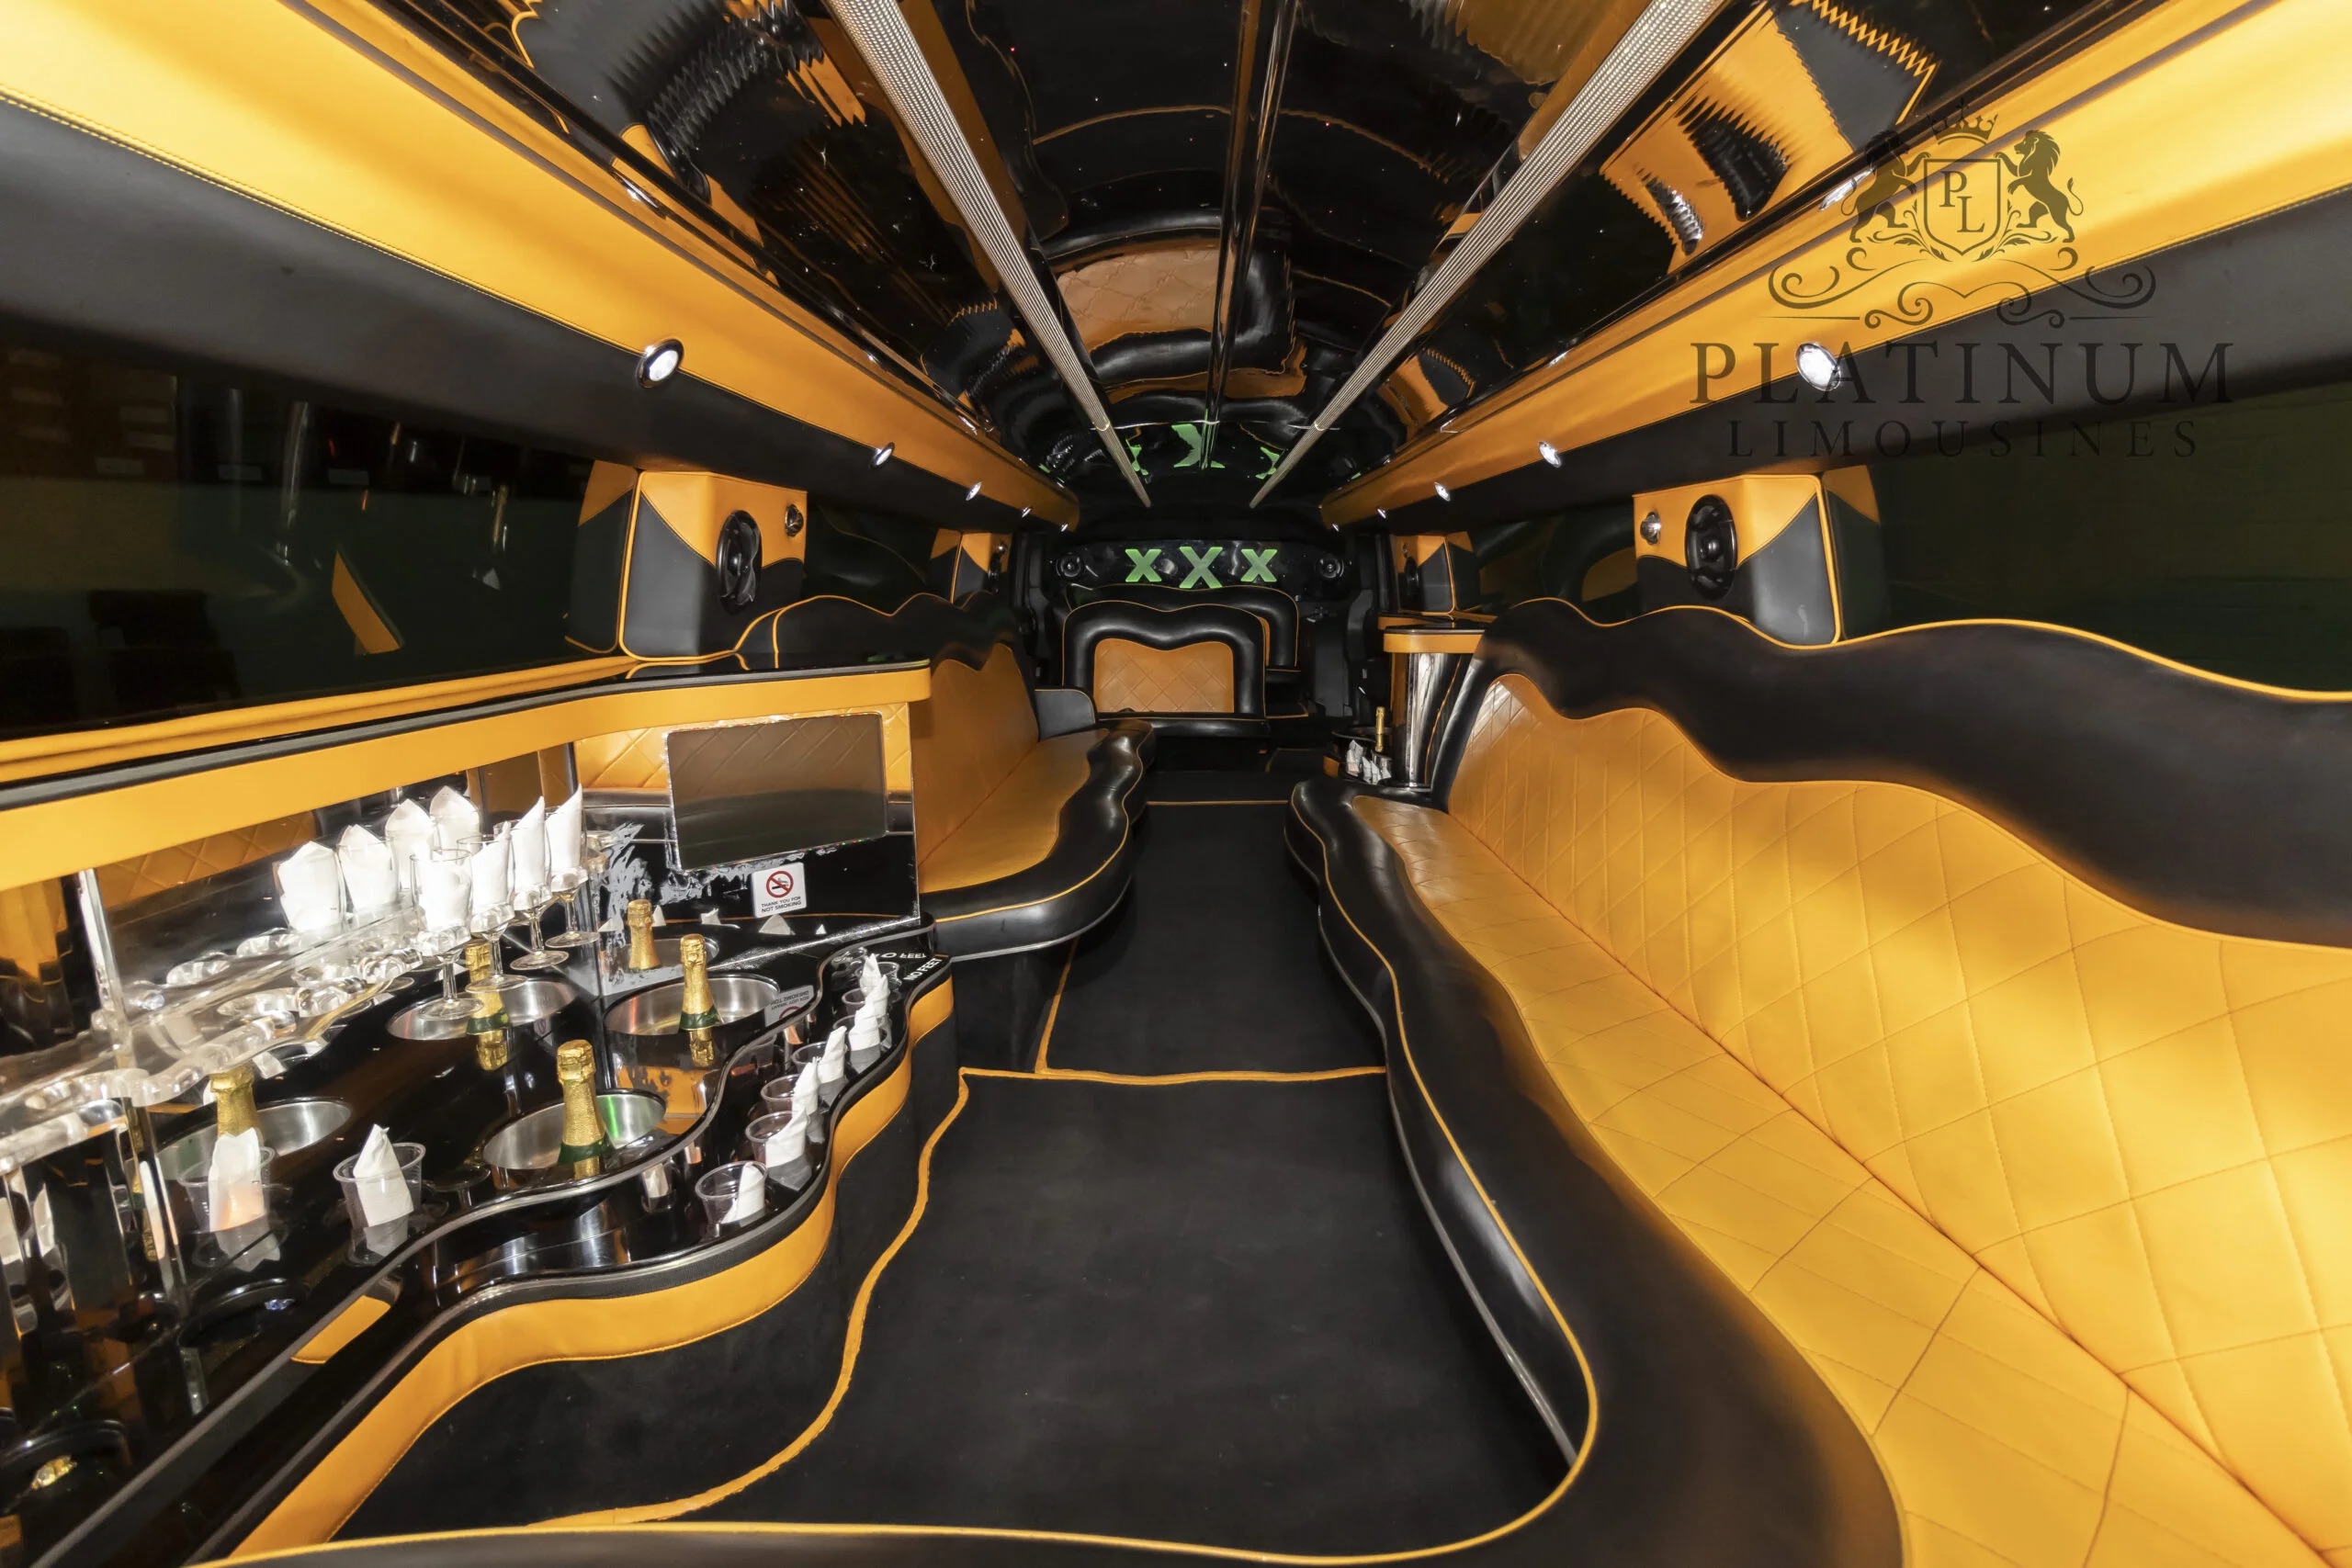 Exploring UKs Top Attractions in a Luxurious Hummer Limo